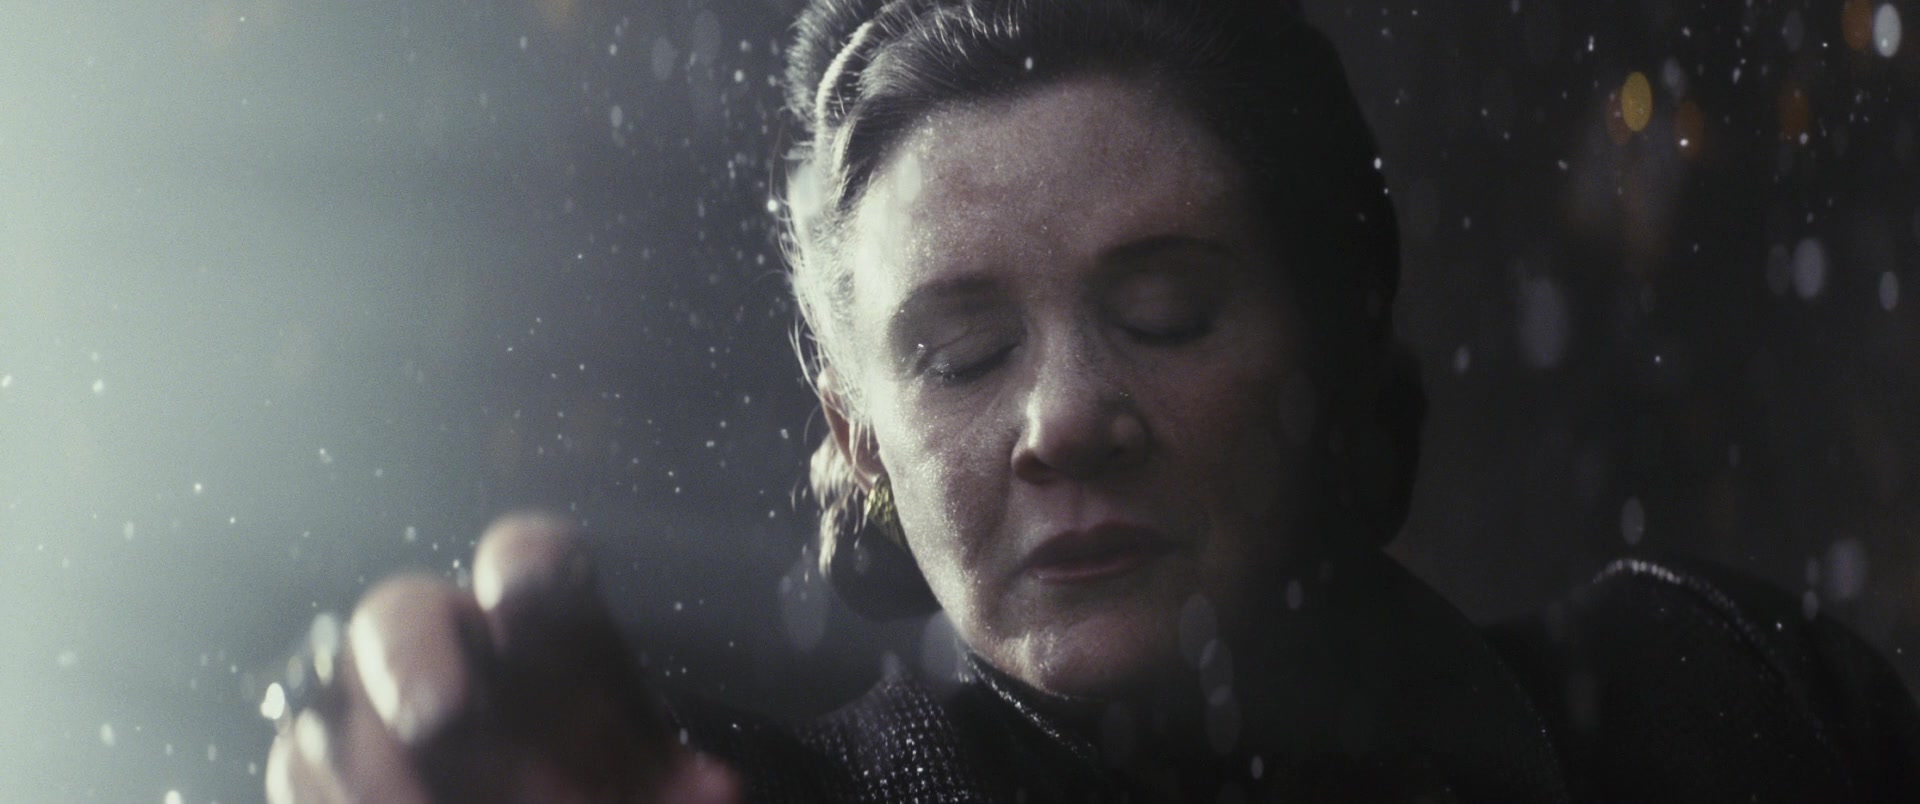 General Leia Organa Solo (Carrie Fisher) uses the Force to pull herself to safety from the vacuum in Star Wars: Episode VII - The Last Jedi (2017), Disney